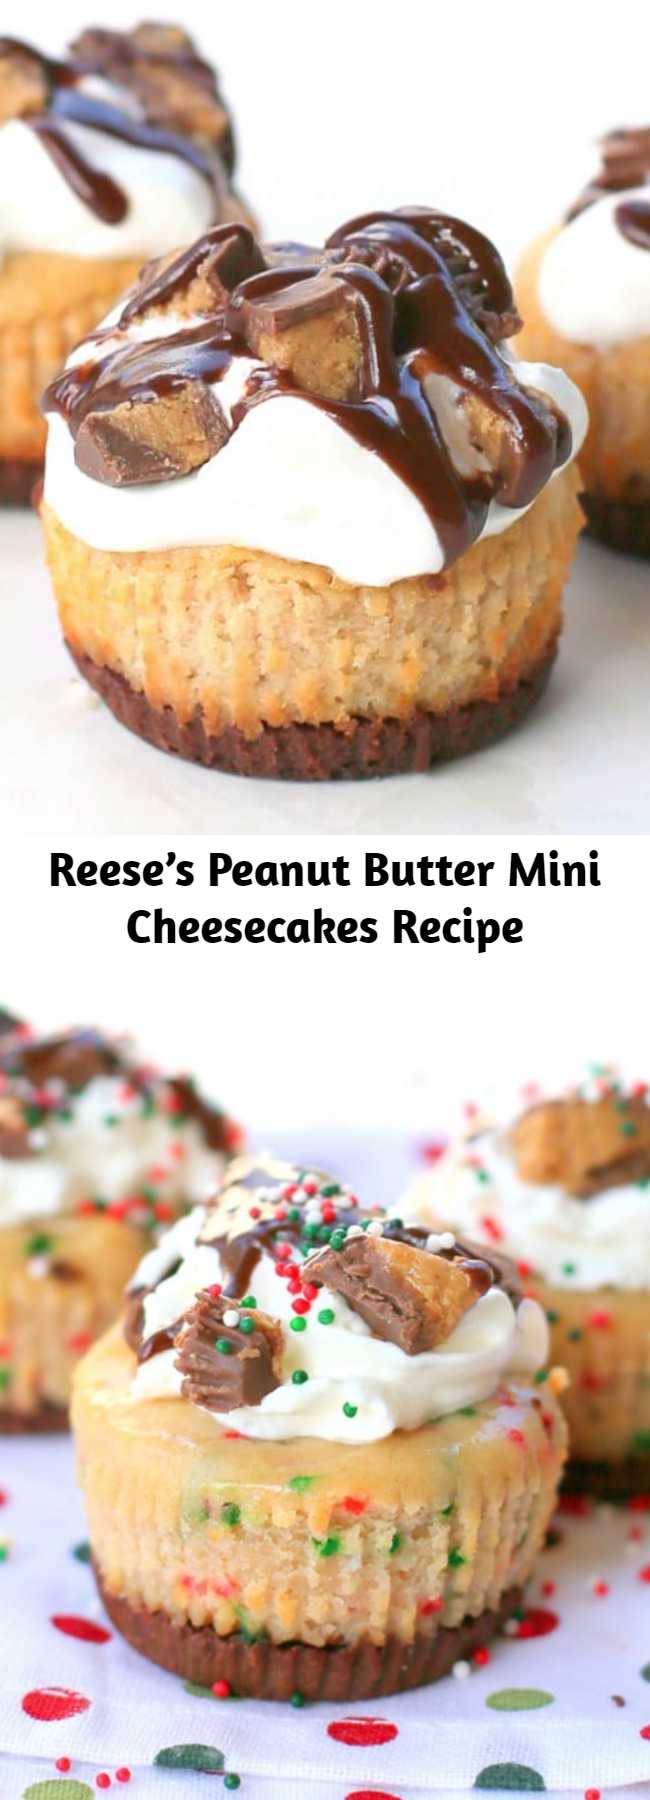 Reese’s Peanut Butter Mini Cheesecakes Recipe - These Reese's Peanut Butter Mini Cheesecakes are so easy! The crust is made from a full size Reese's peanut butter cup.